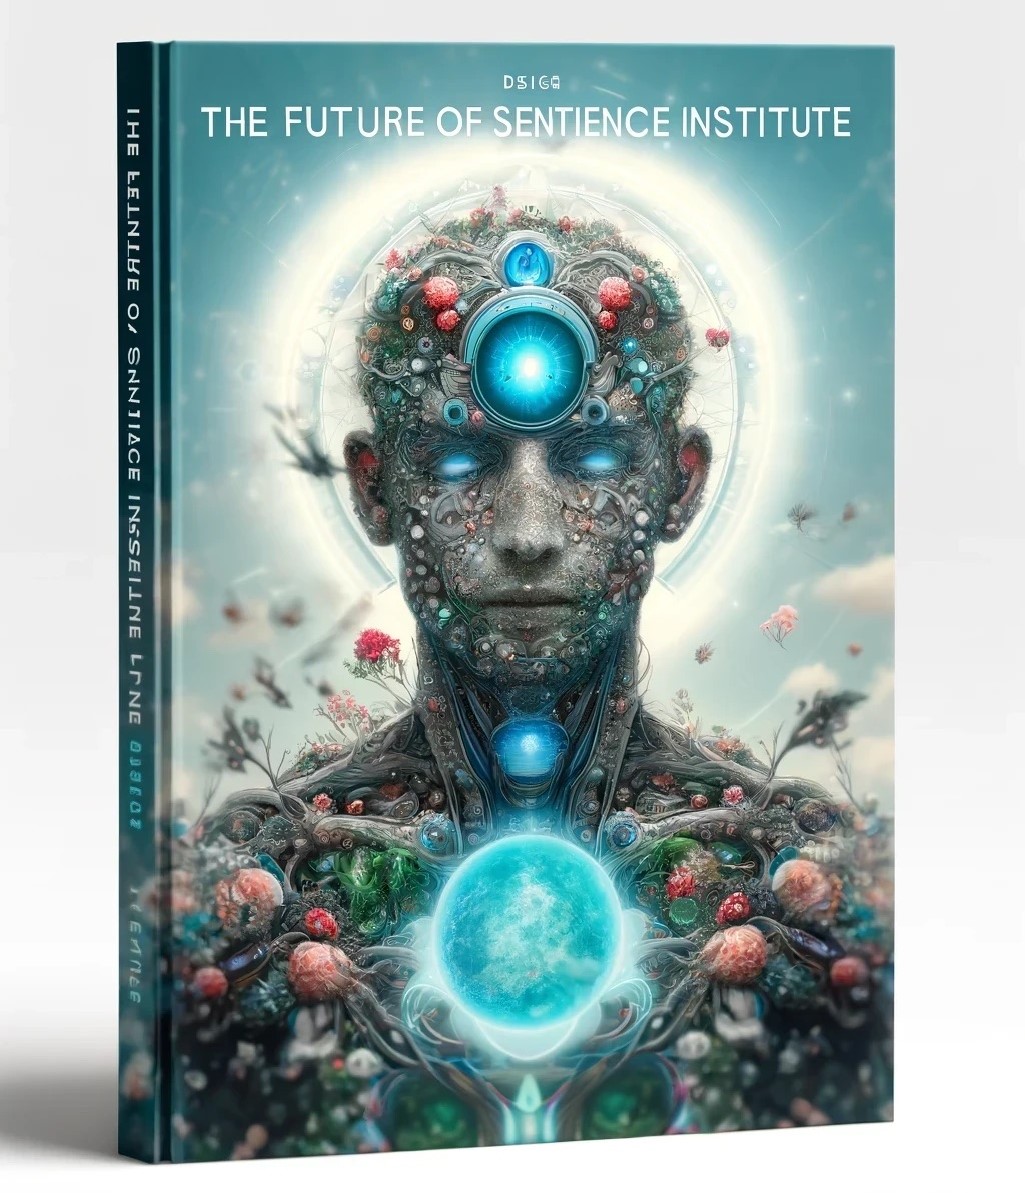 Future of Sentience Institute by David Pearce